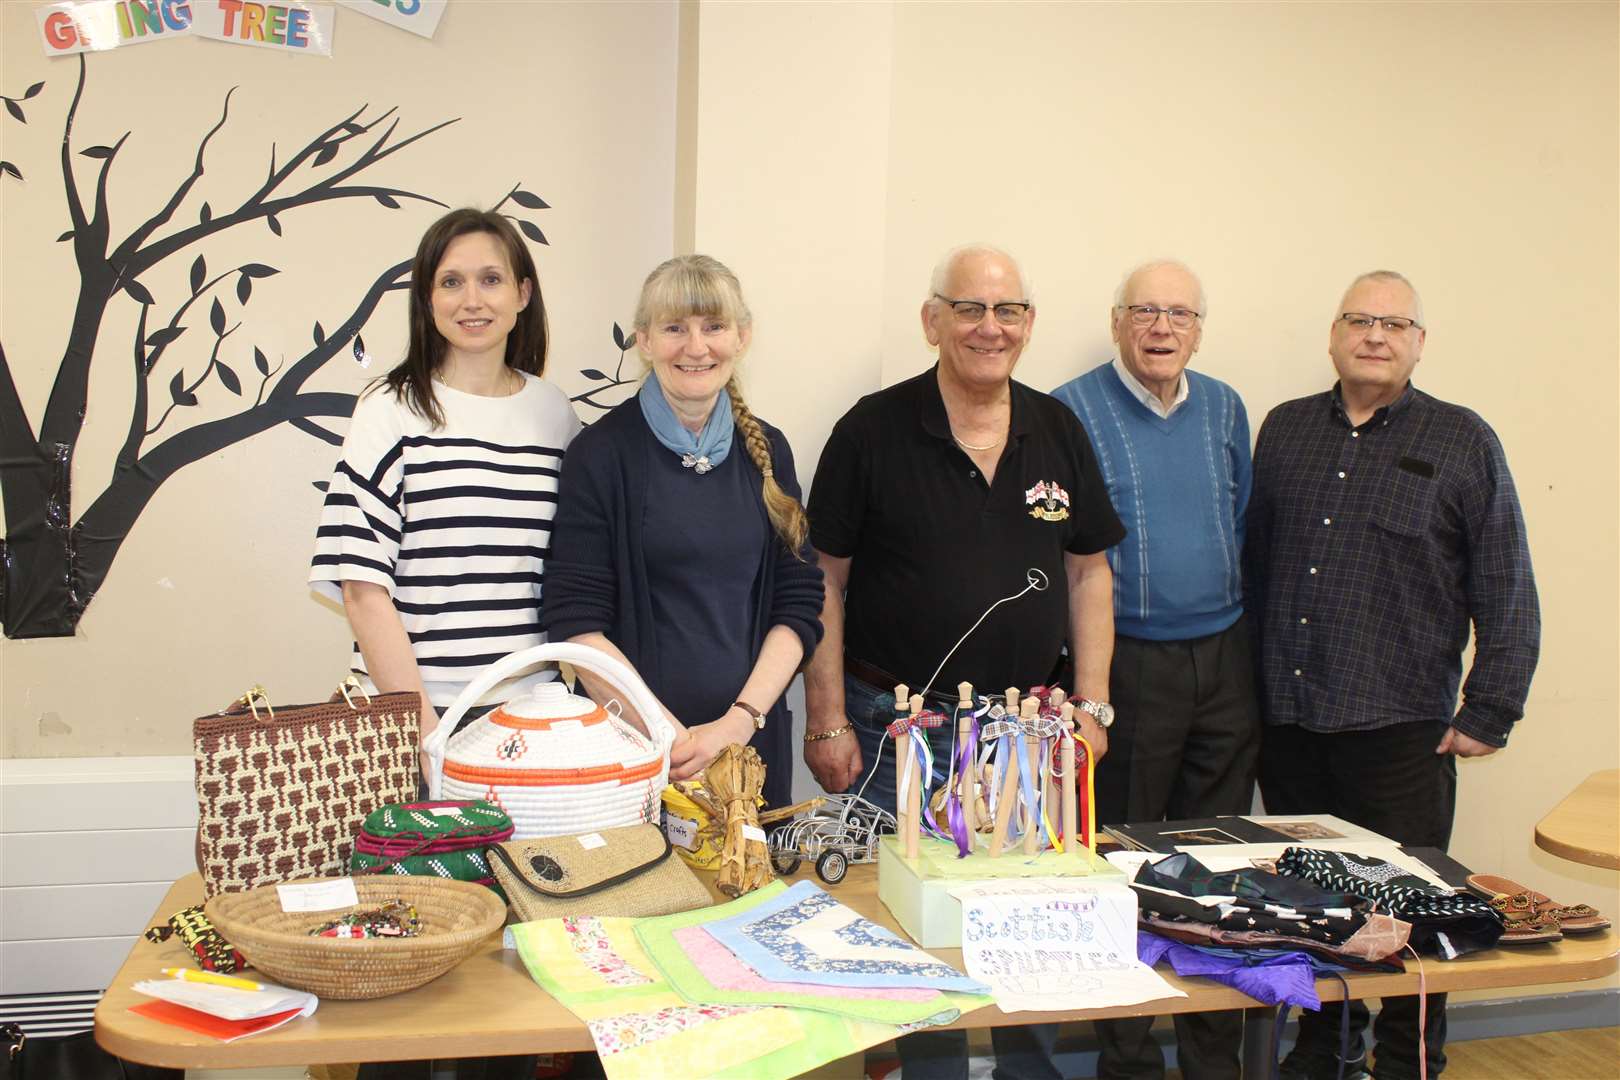 Sara Lucas (left) with St Kizito schools and community charity founder Rachel Rennie, Bob Durno, Ron Bird, Bruce Rennie, trustees and supporters with some Ugandan artefacts at Saturday's daffodil tea at the Catholic Church hall. Picture: Griselda McGregor